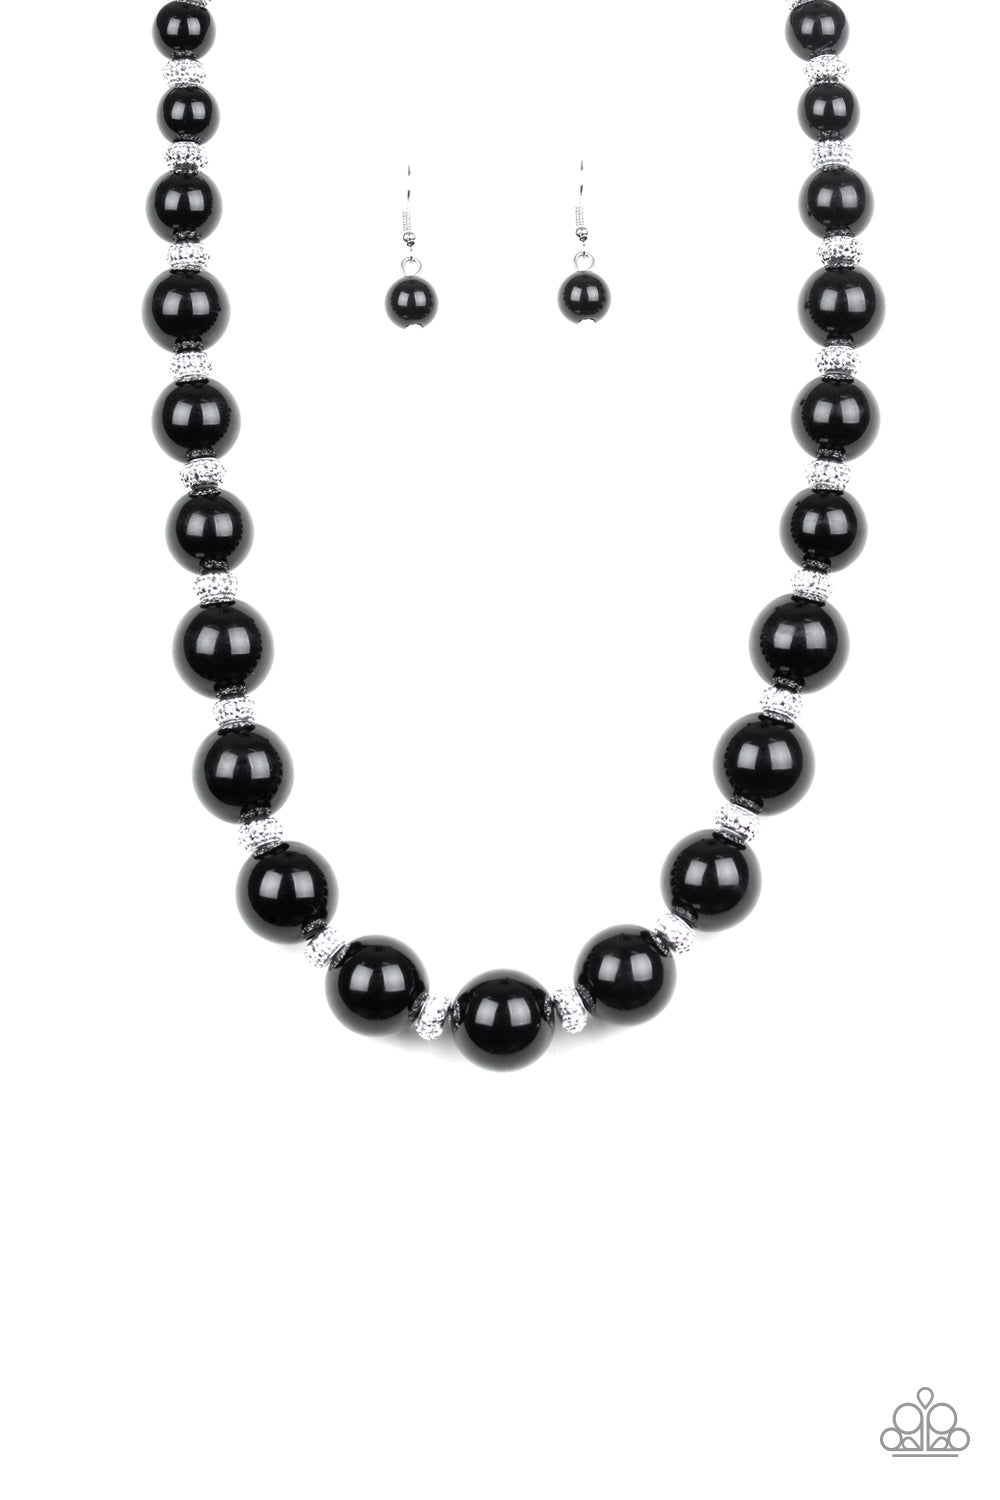 Paparazzi - Uptown Heiress - Black & Silver Necklace